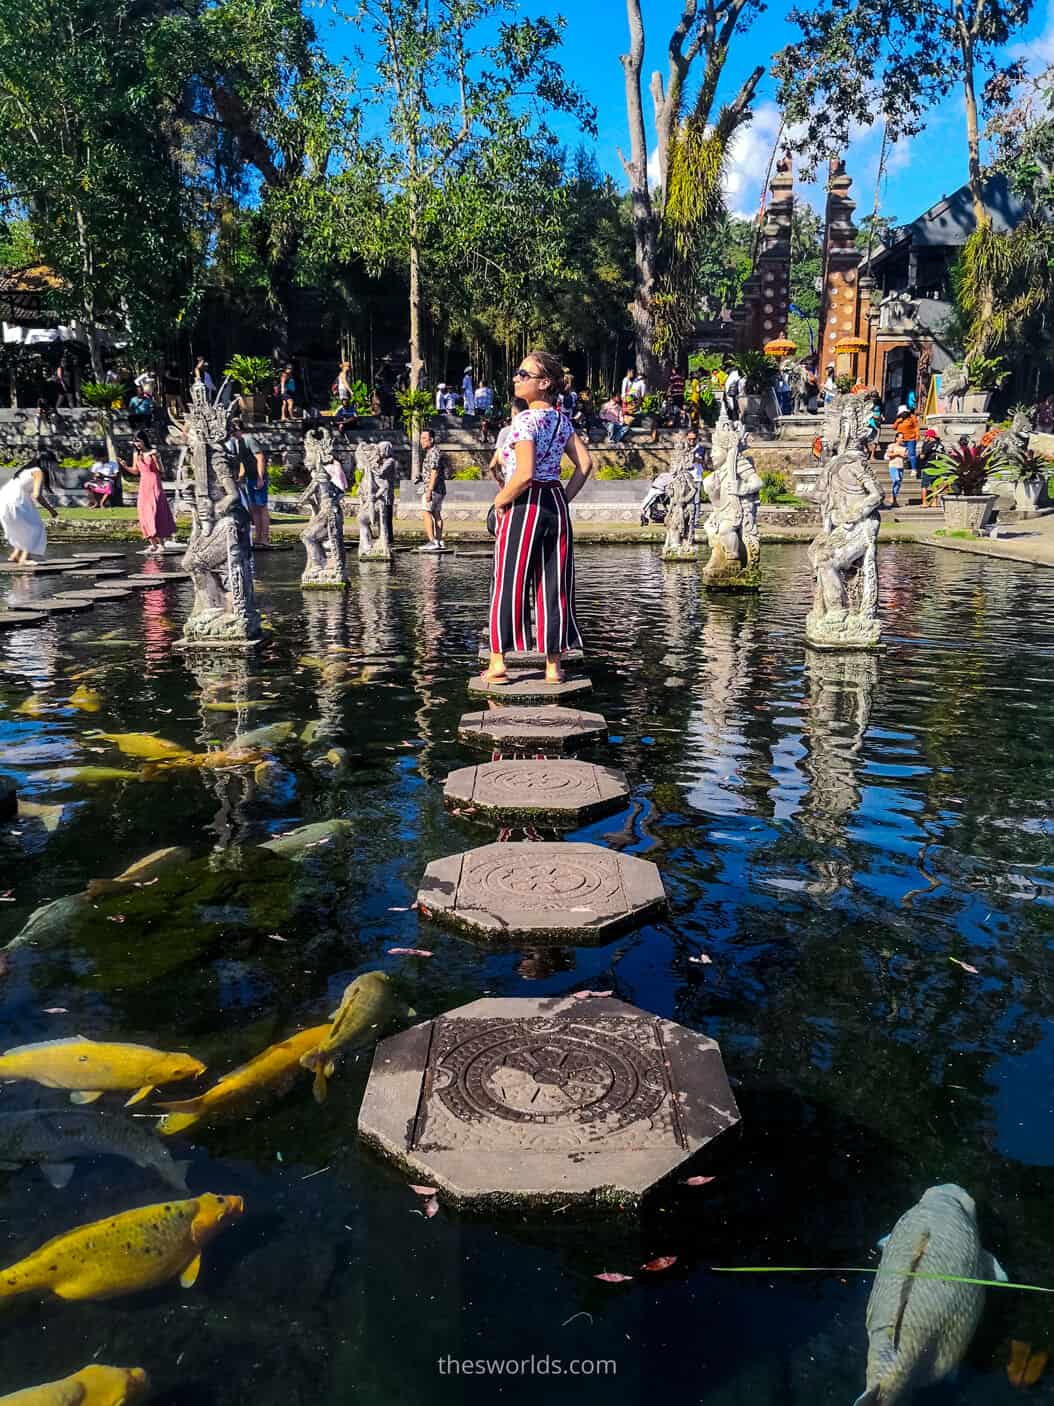 Girl posing on a rock in the water at Bali